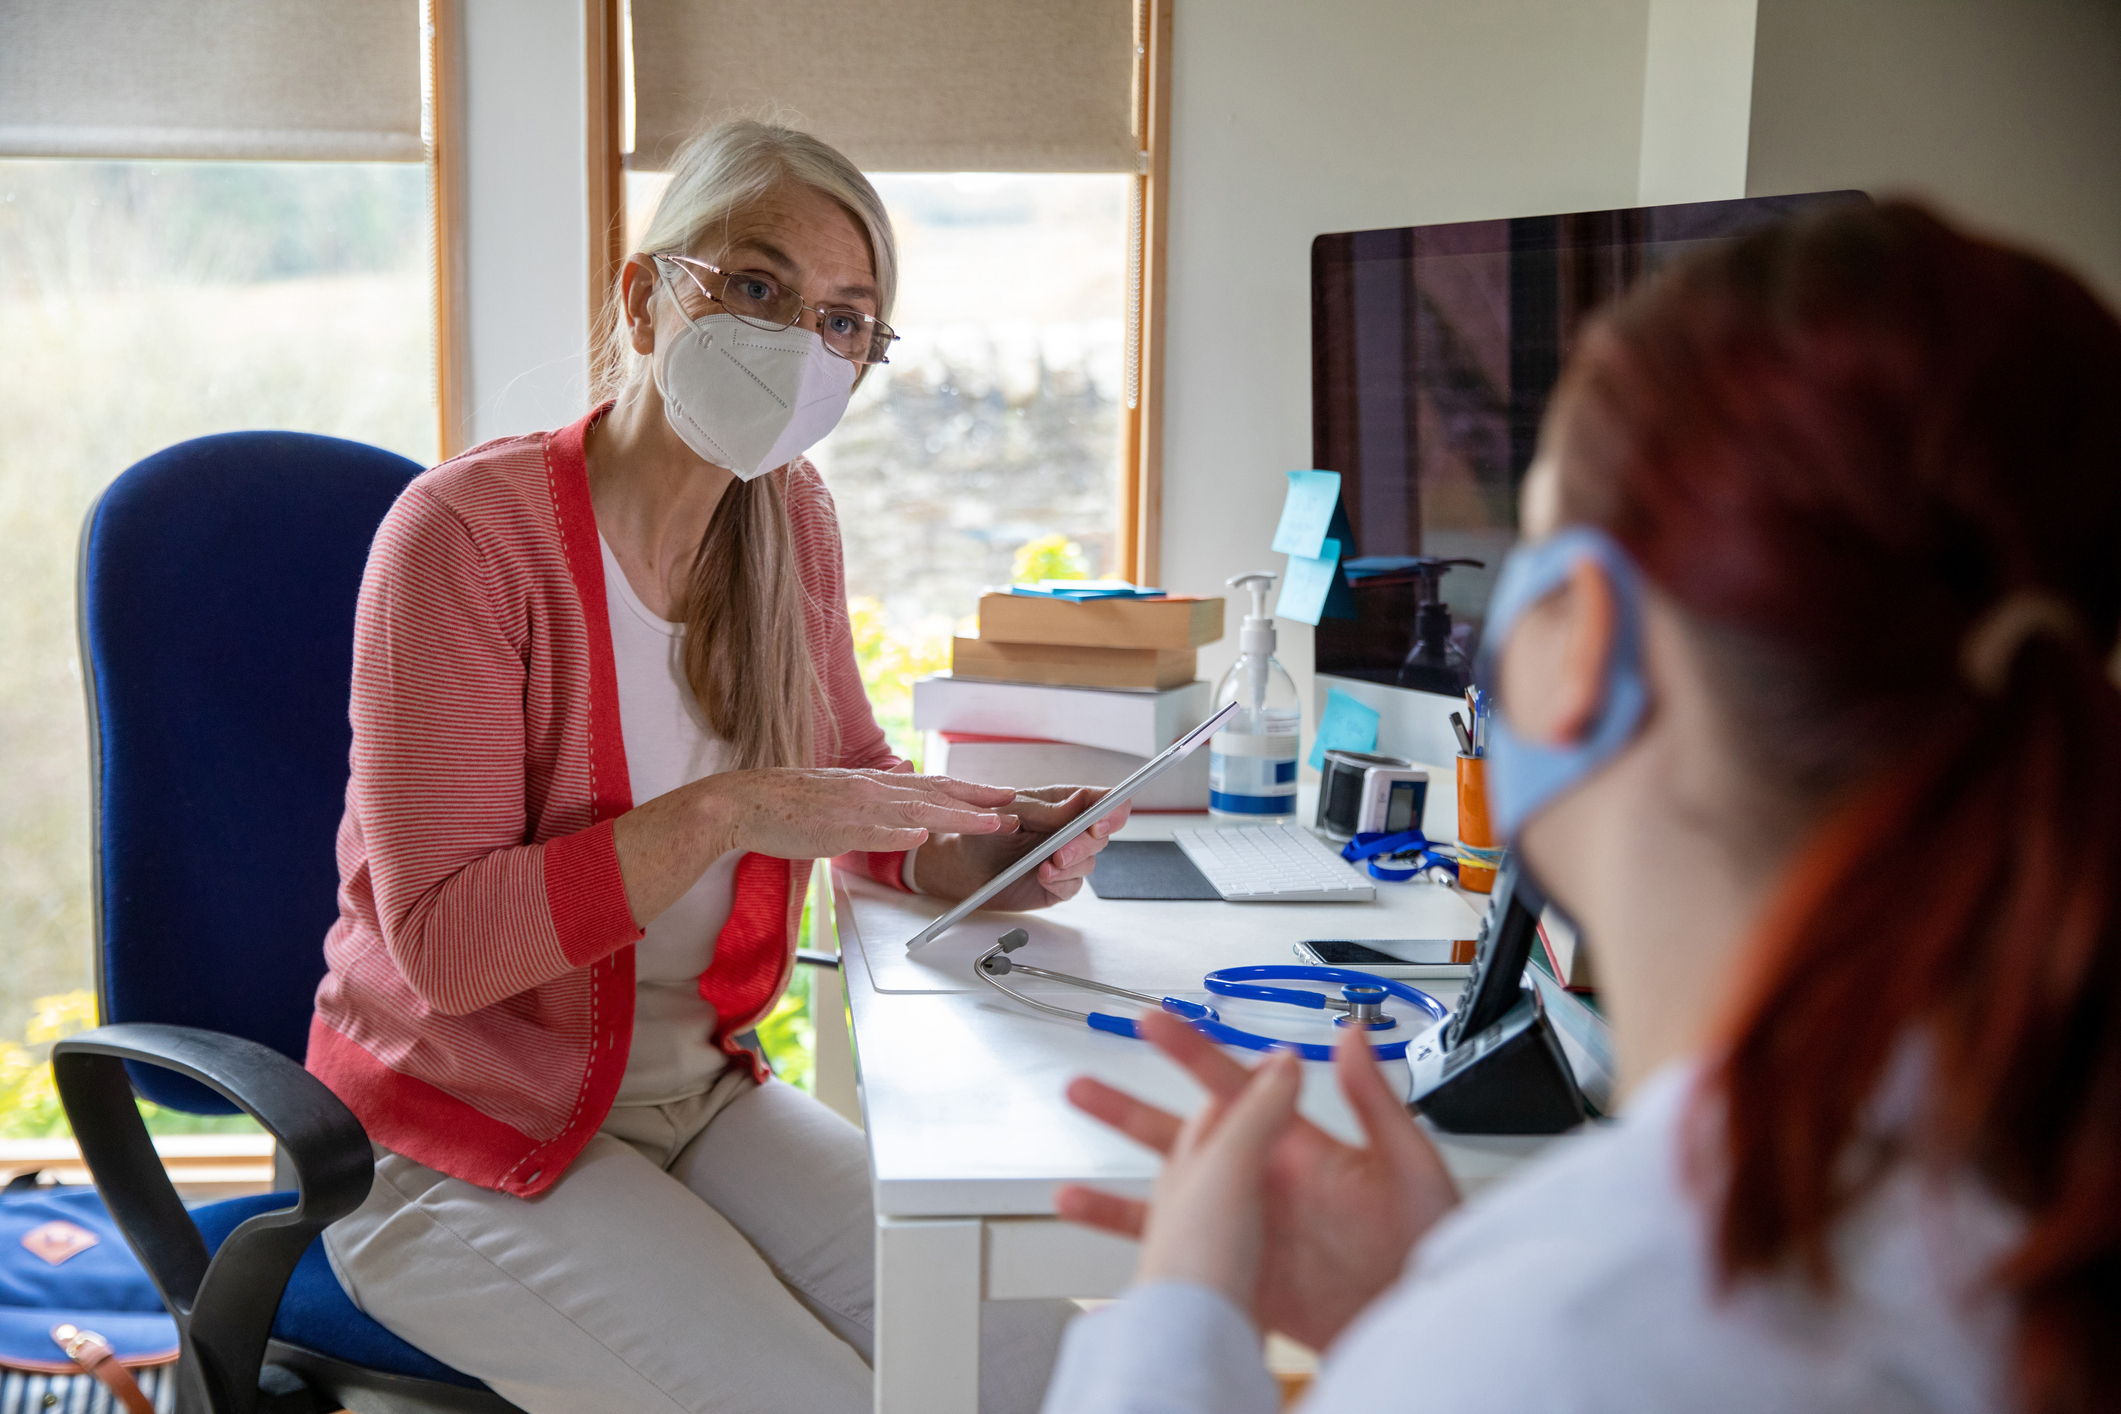 Doctor wearing a protective face mask working in a surgery during the Covid 19 pandemic. She is sitting at her desk with her medical tools in front of her while she holds a digital tablet. A patient is sitting with her, also wearing a face mask.